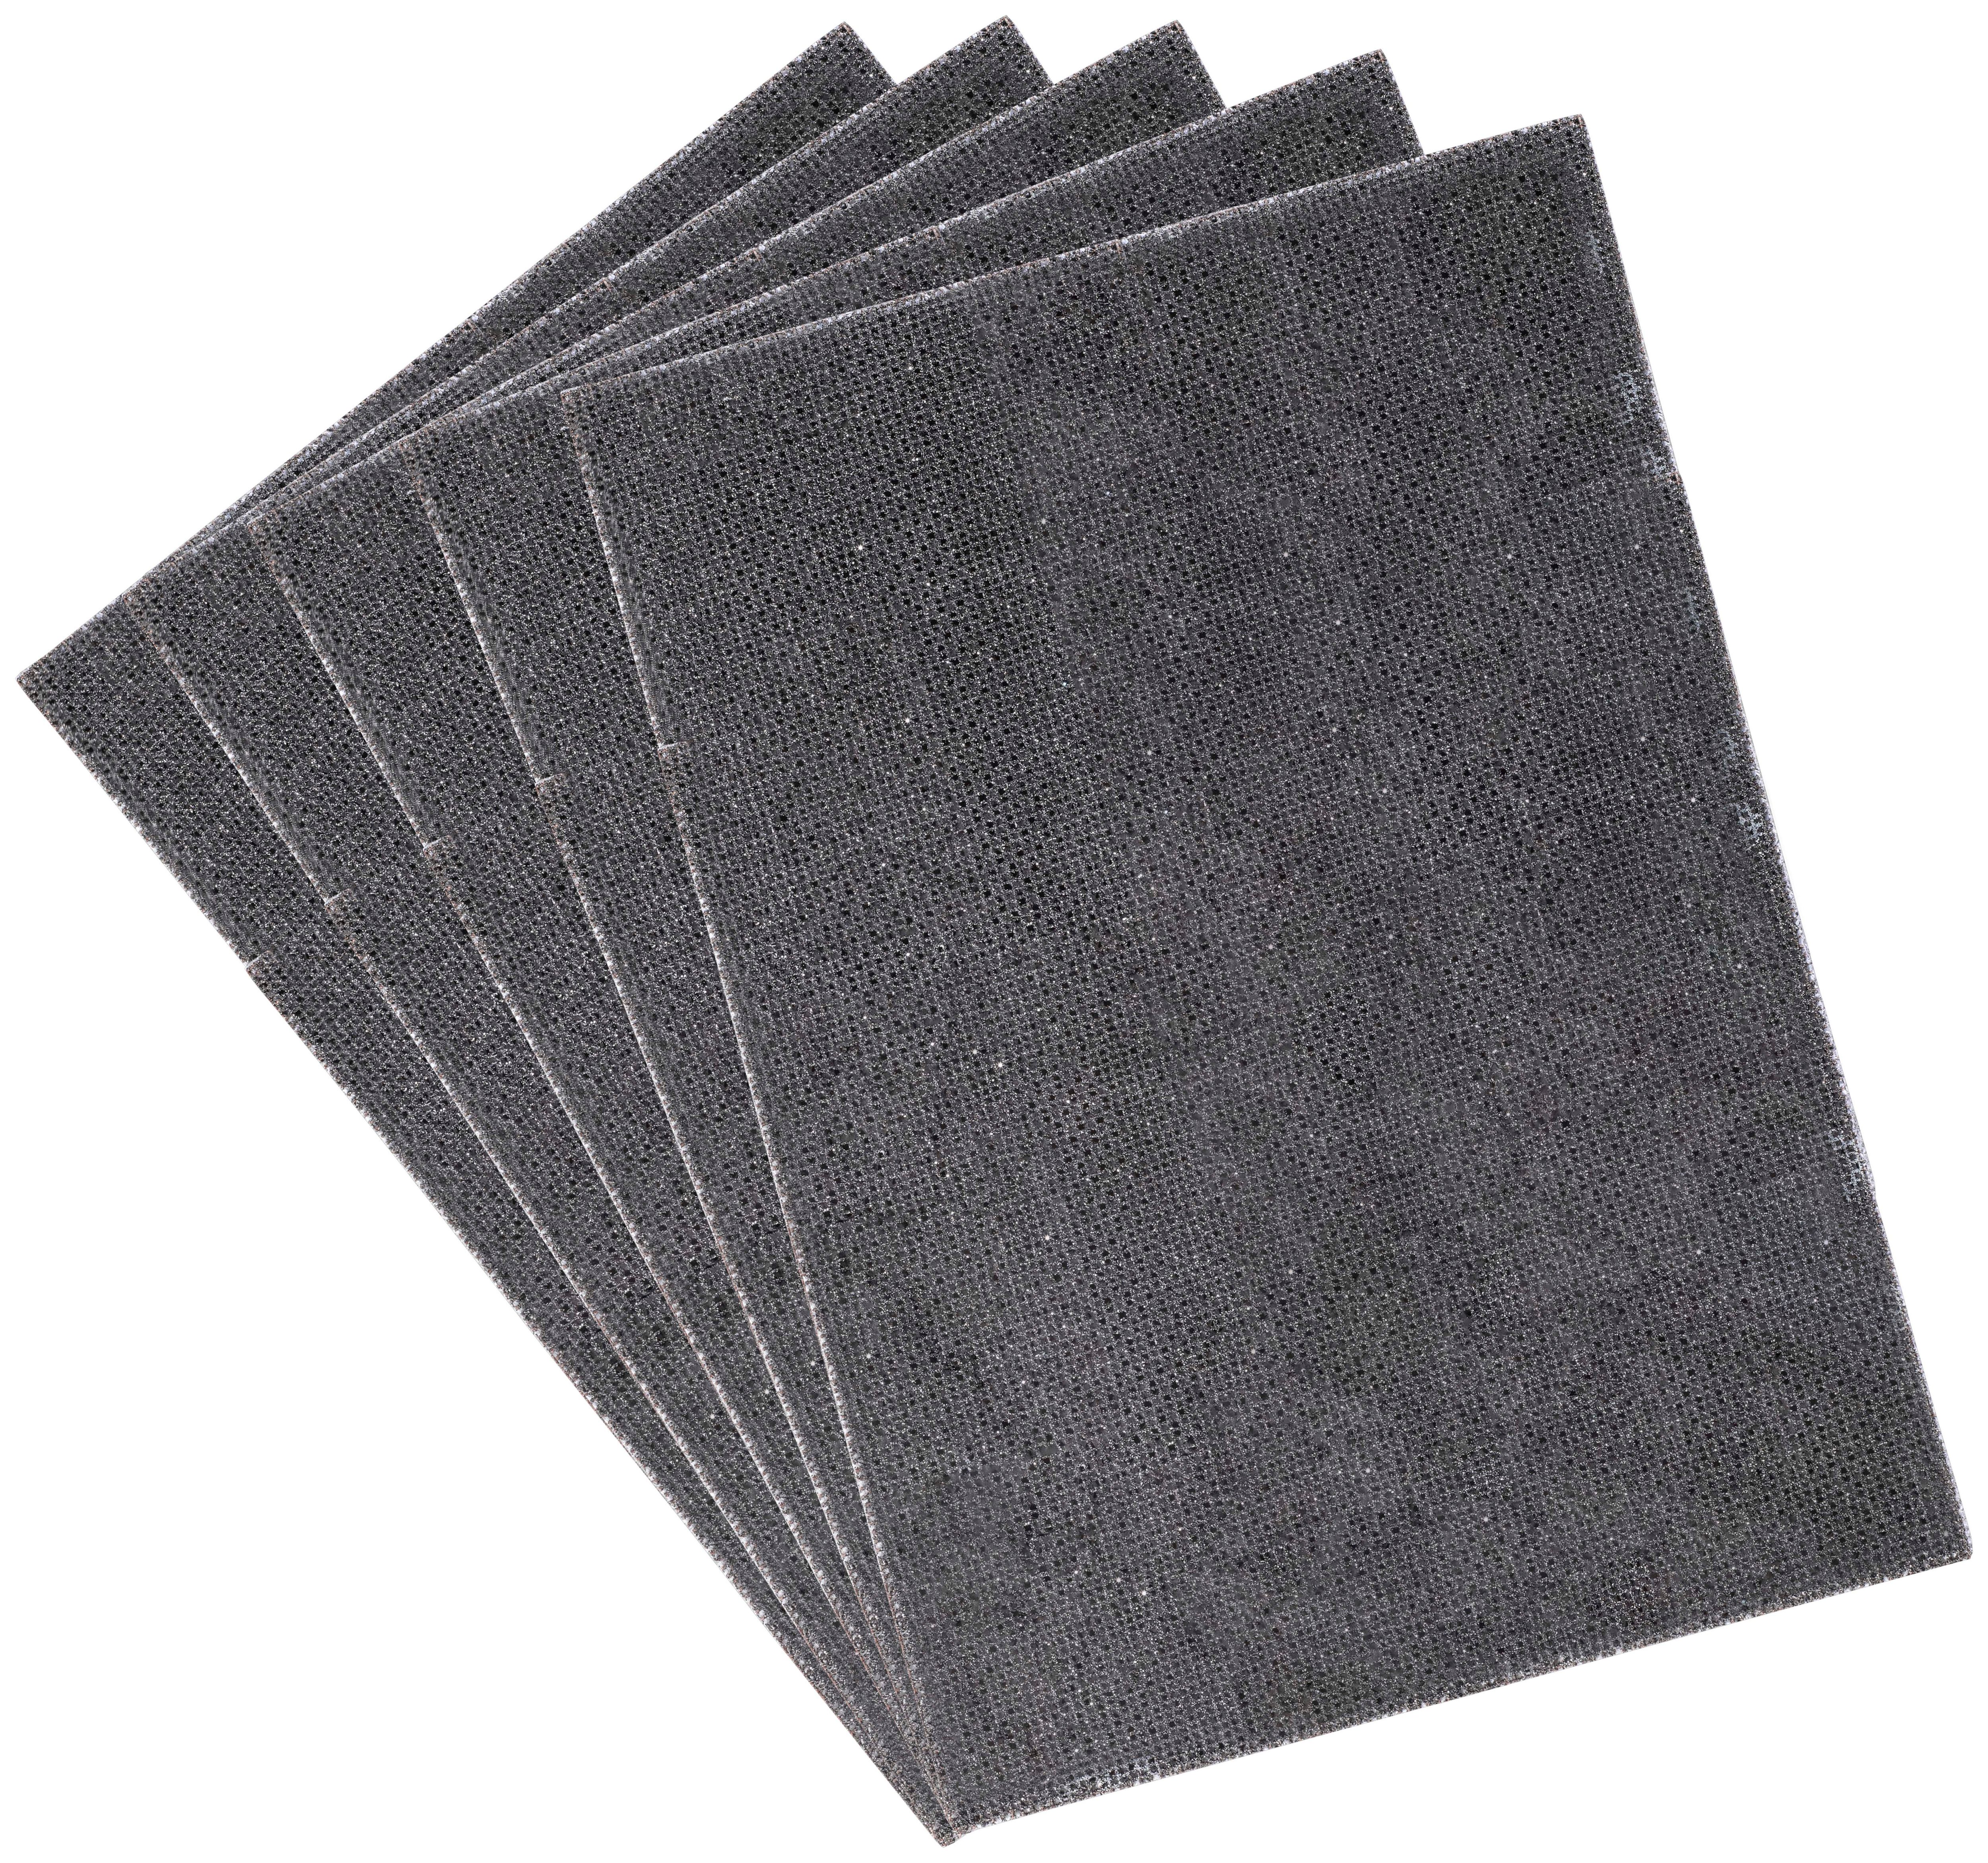 Image of Einhell kwb A4 Extra Fine P120 Sanding Mesh Sheet - Pack of 5